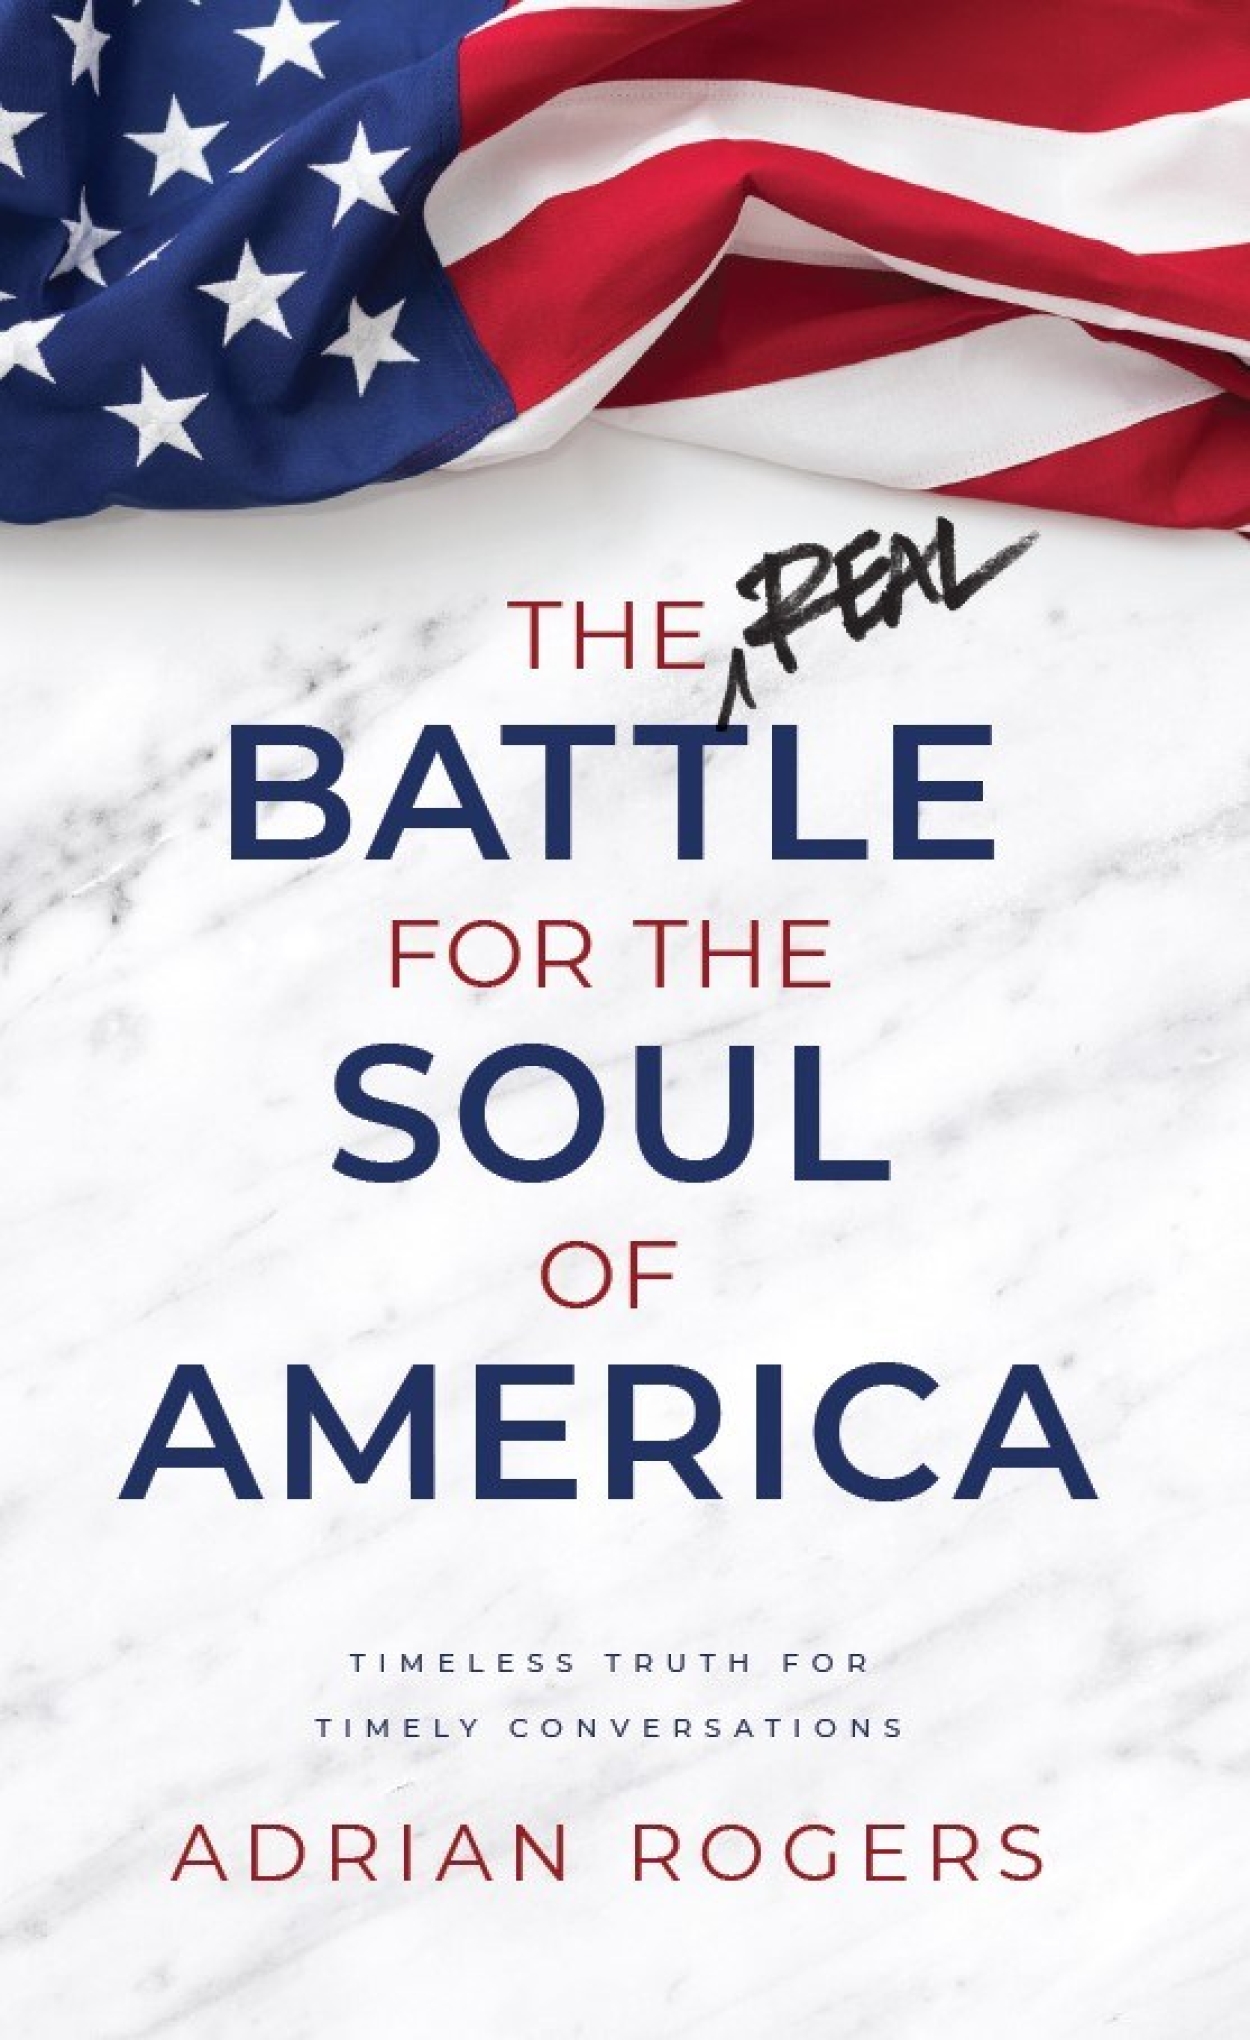 B130 the real battle for the soul of america book STORE DETAIL front